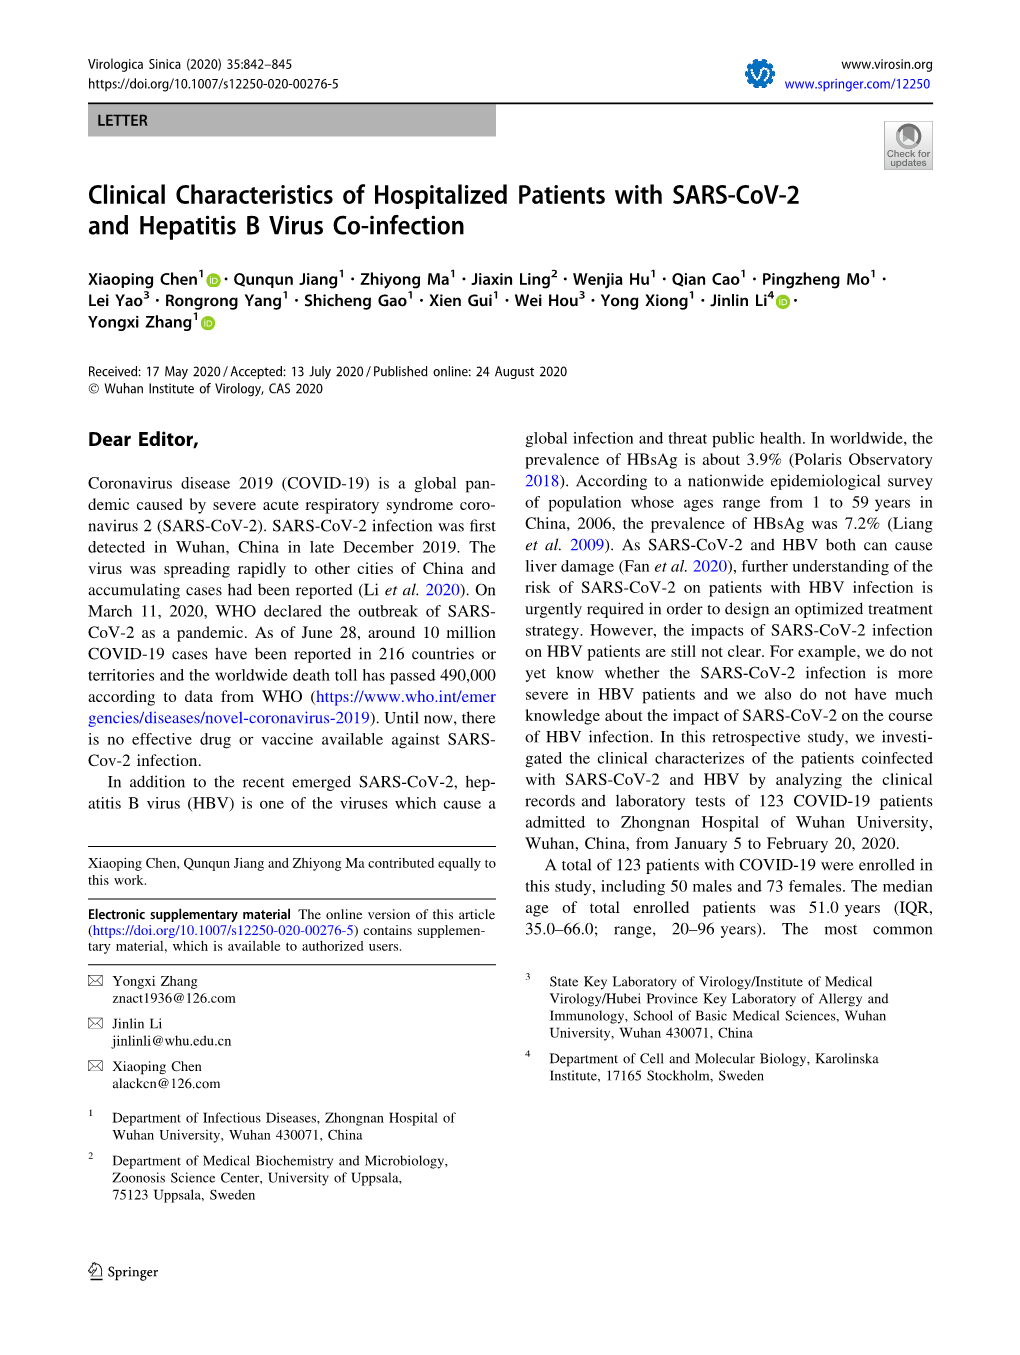 Clinical Characteristics of Hospitalized Patients with SARS-Cov-2 and Hepatitis B Virus Co-Infection